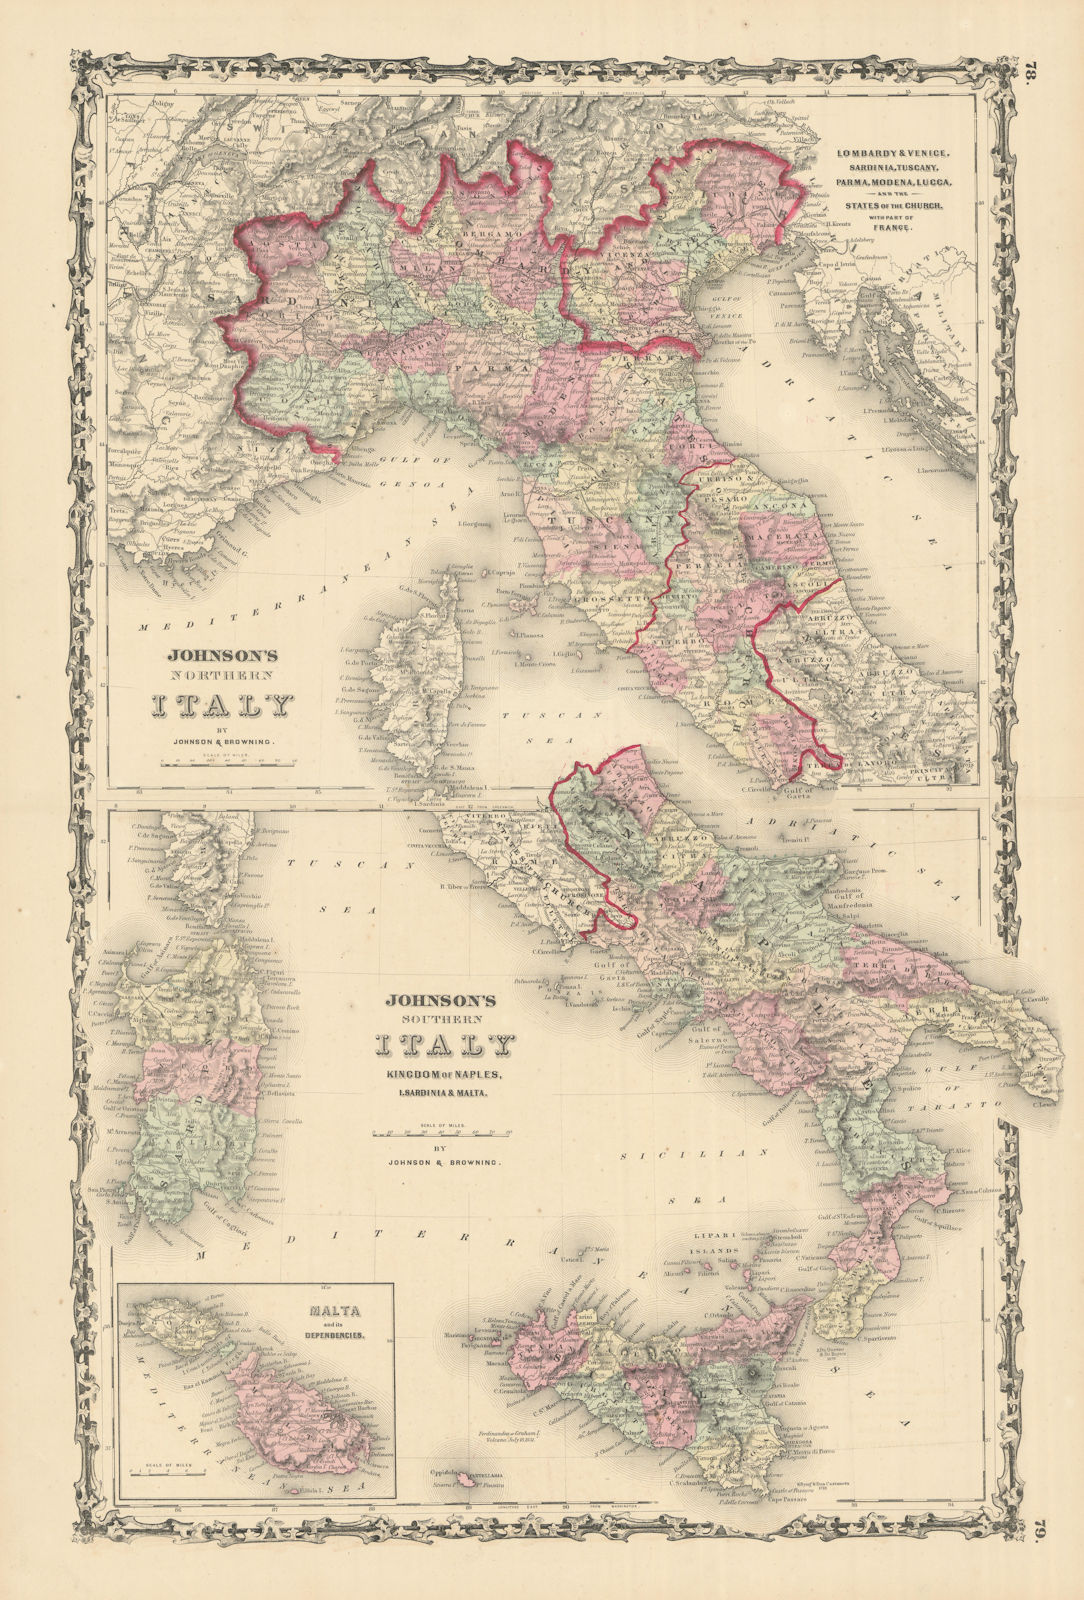 Associate Product Johnson's Northern & Southern Italy. Malta. Unusual juxtaposition 1861 old map